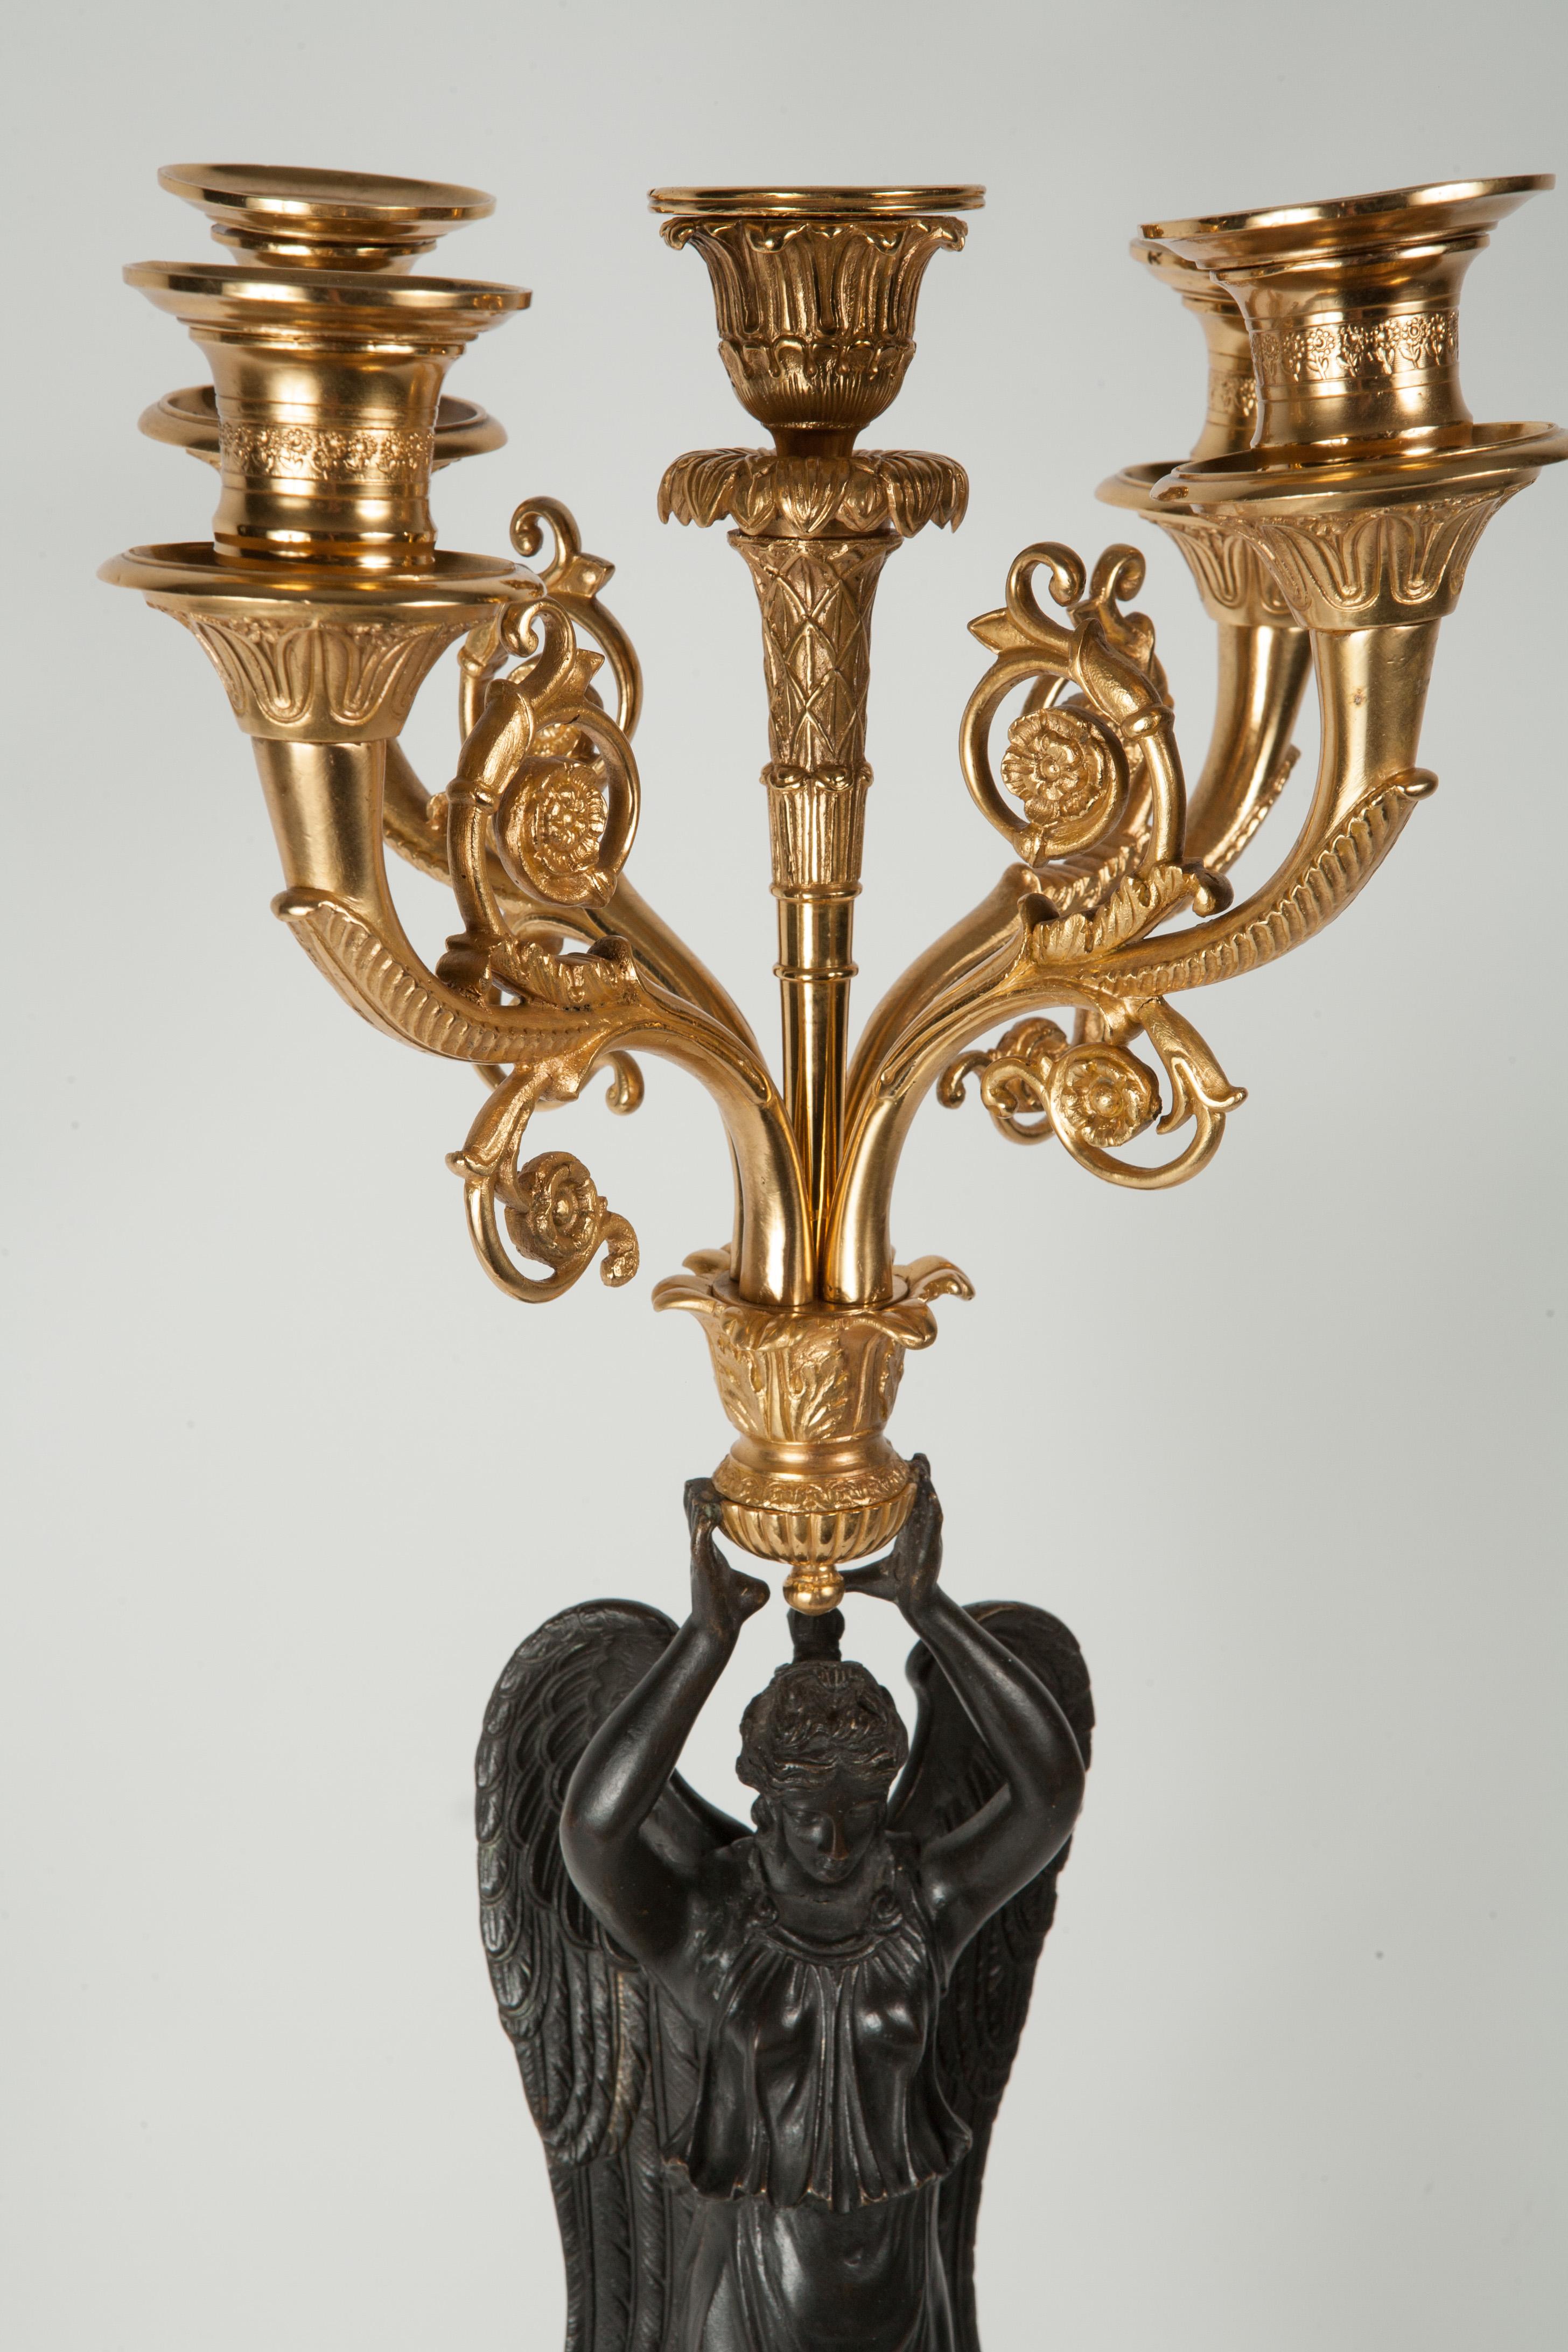 French Pair of 19th-Century Empire Style Bronze and Gilt Candelabras